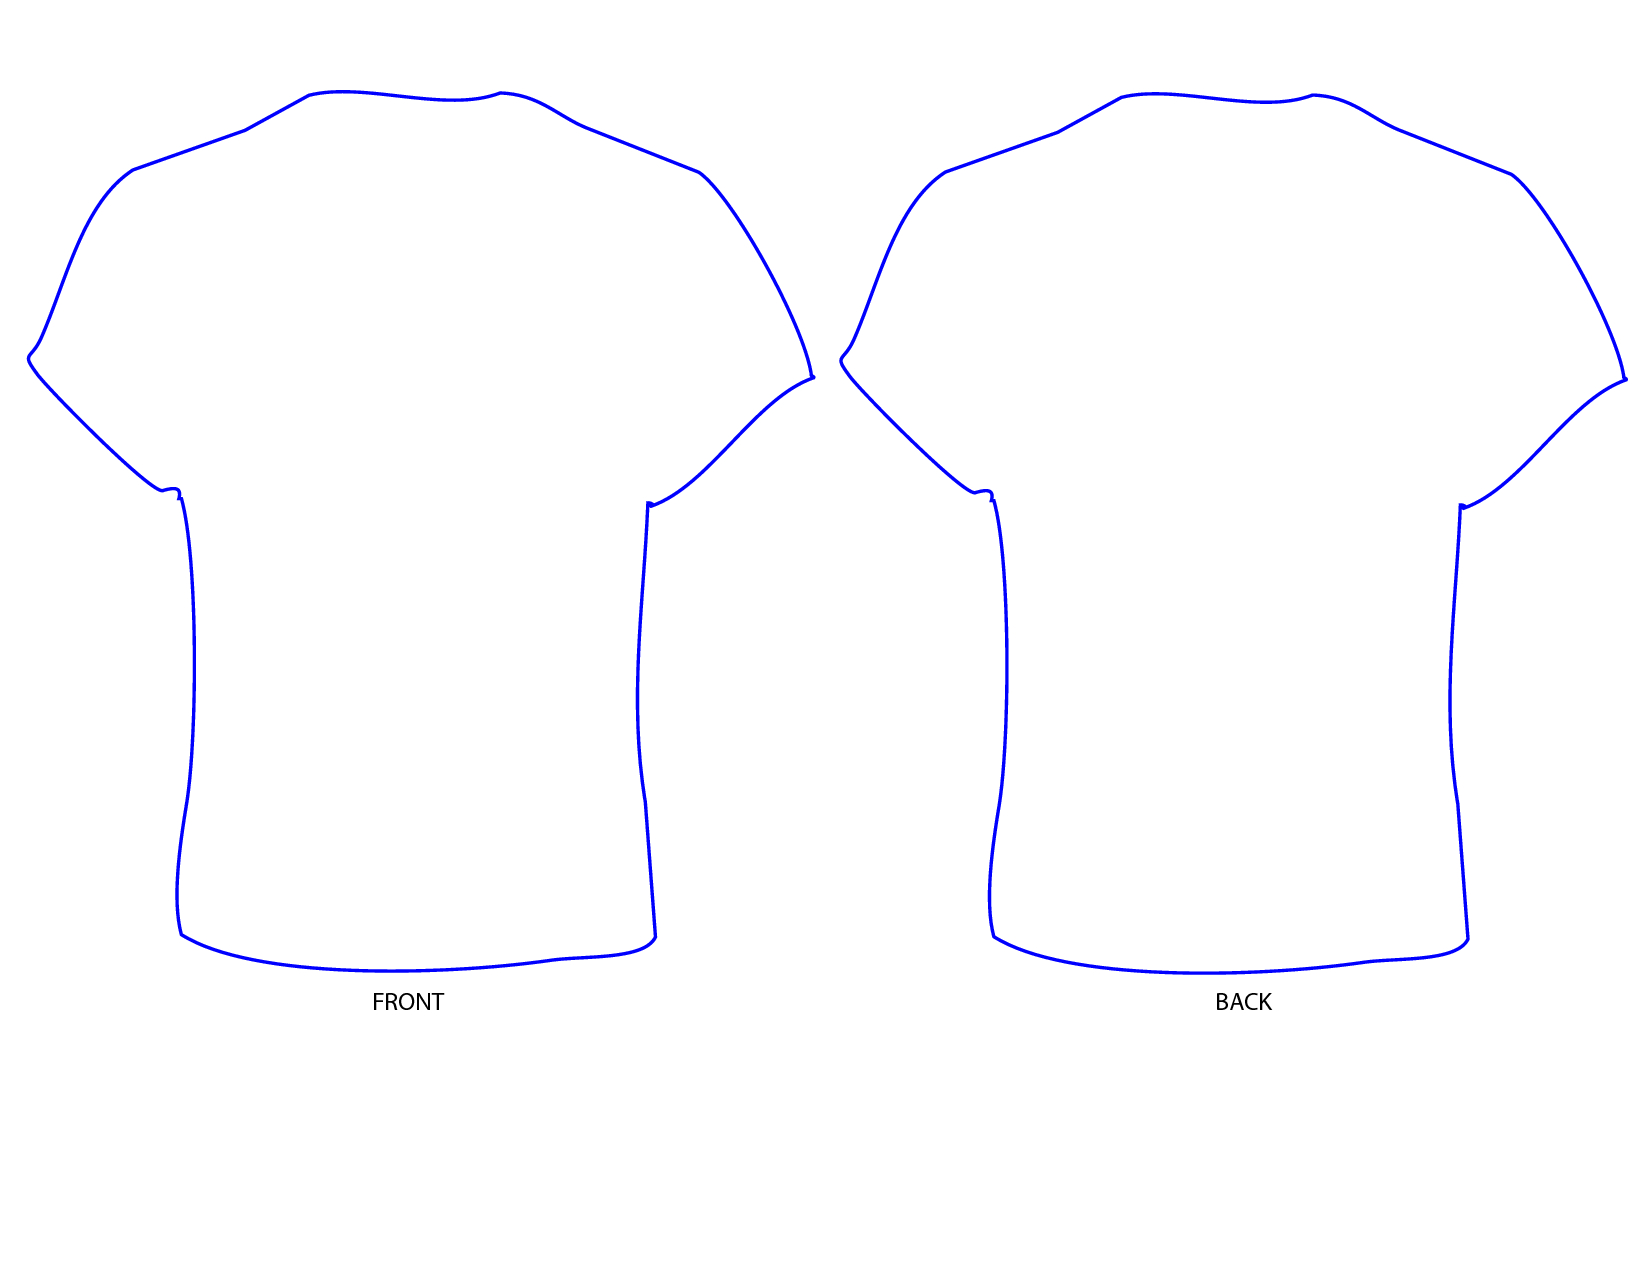 Free T Shirt Template Printable, Download Free Clip Art Pertaining To Blank Tshirt Template Printable